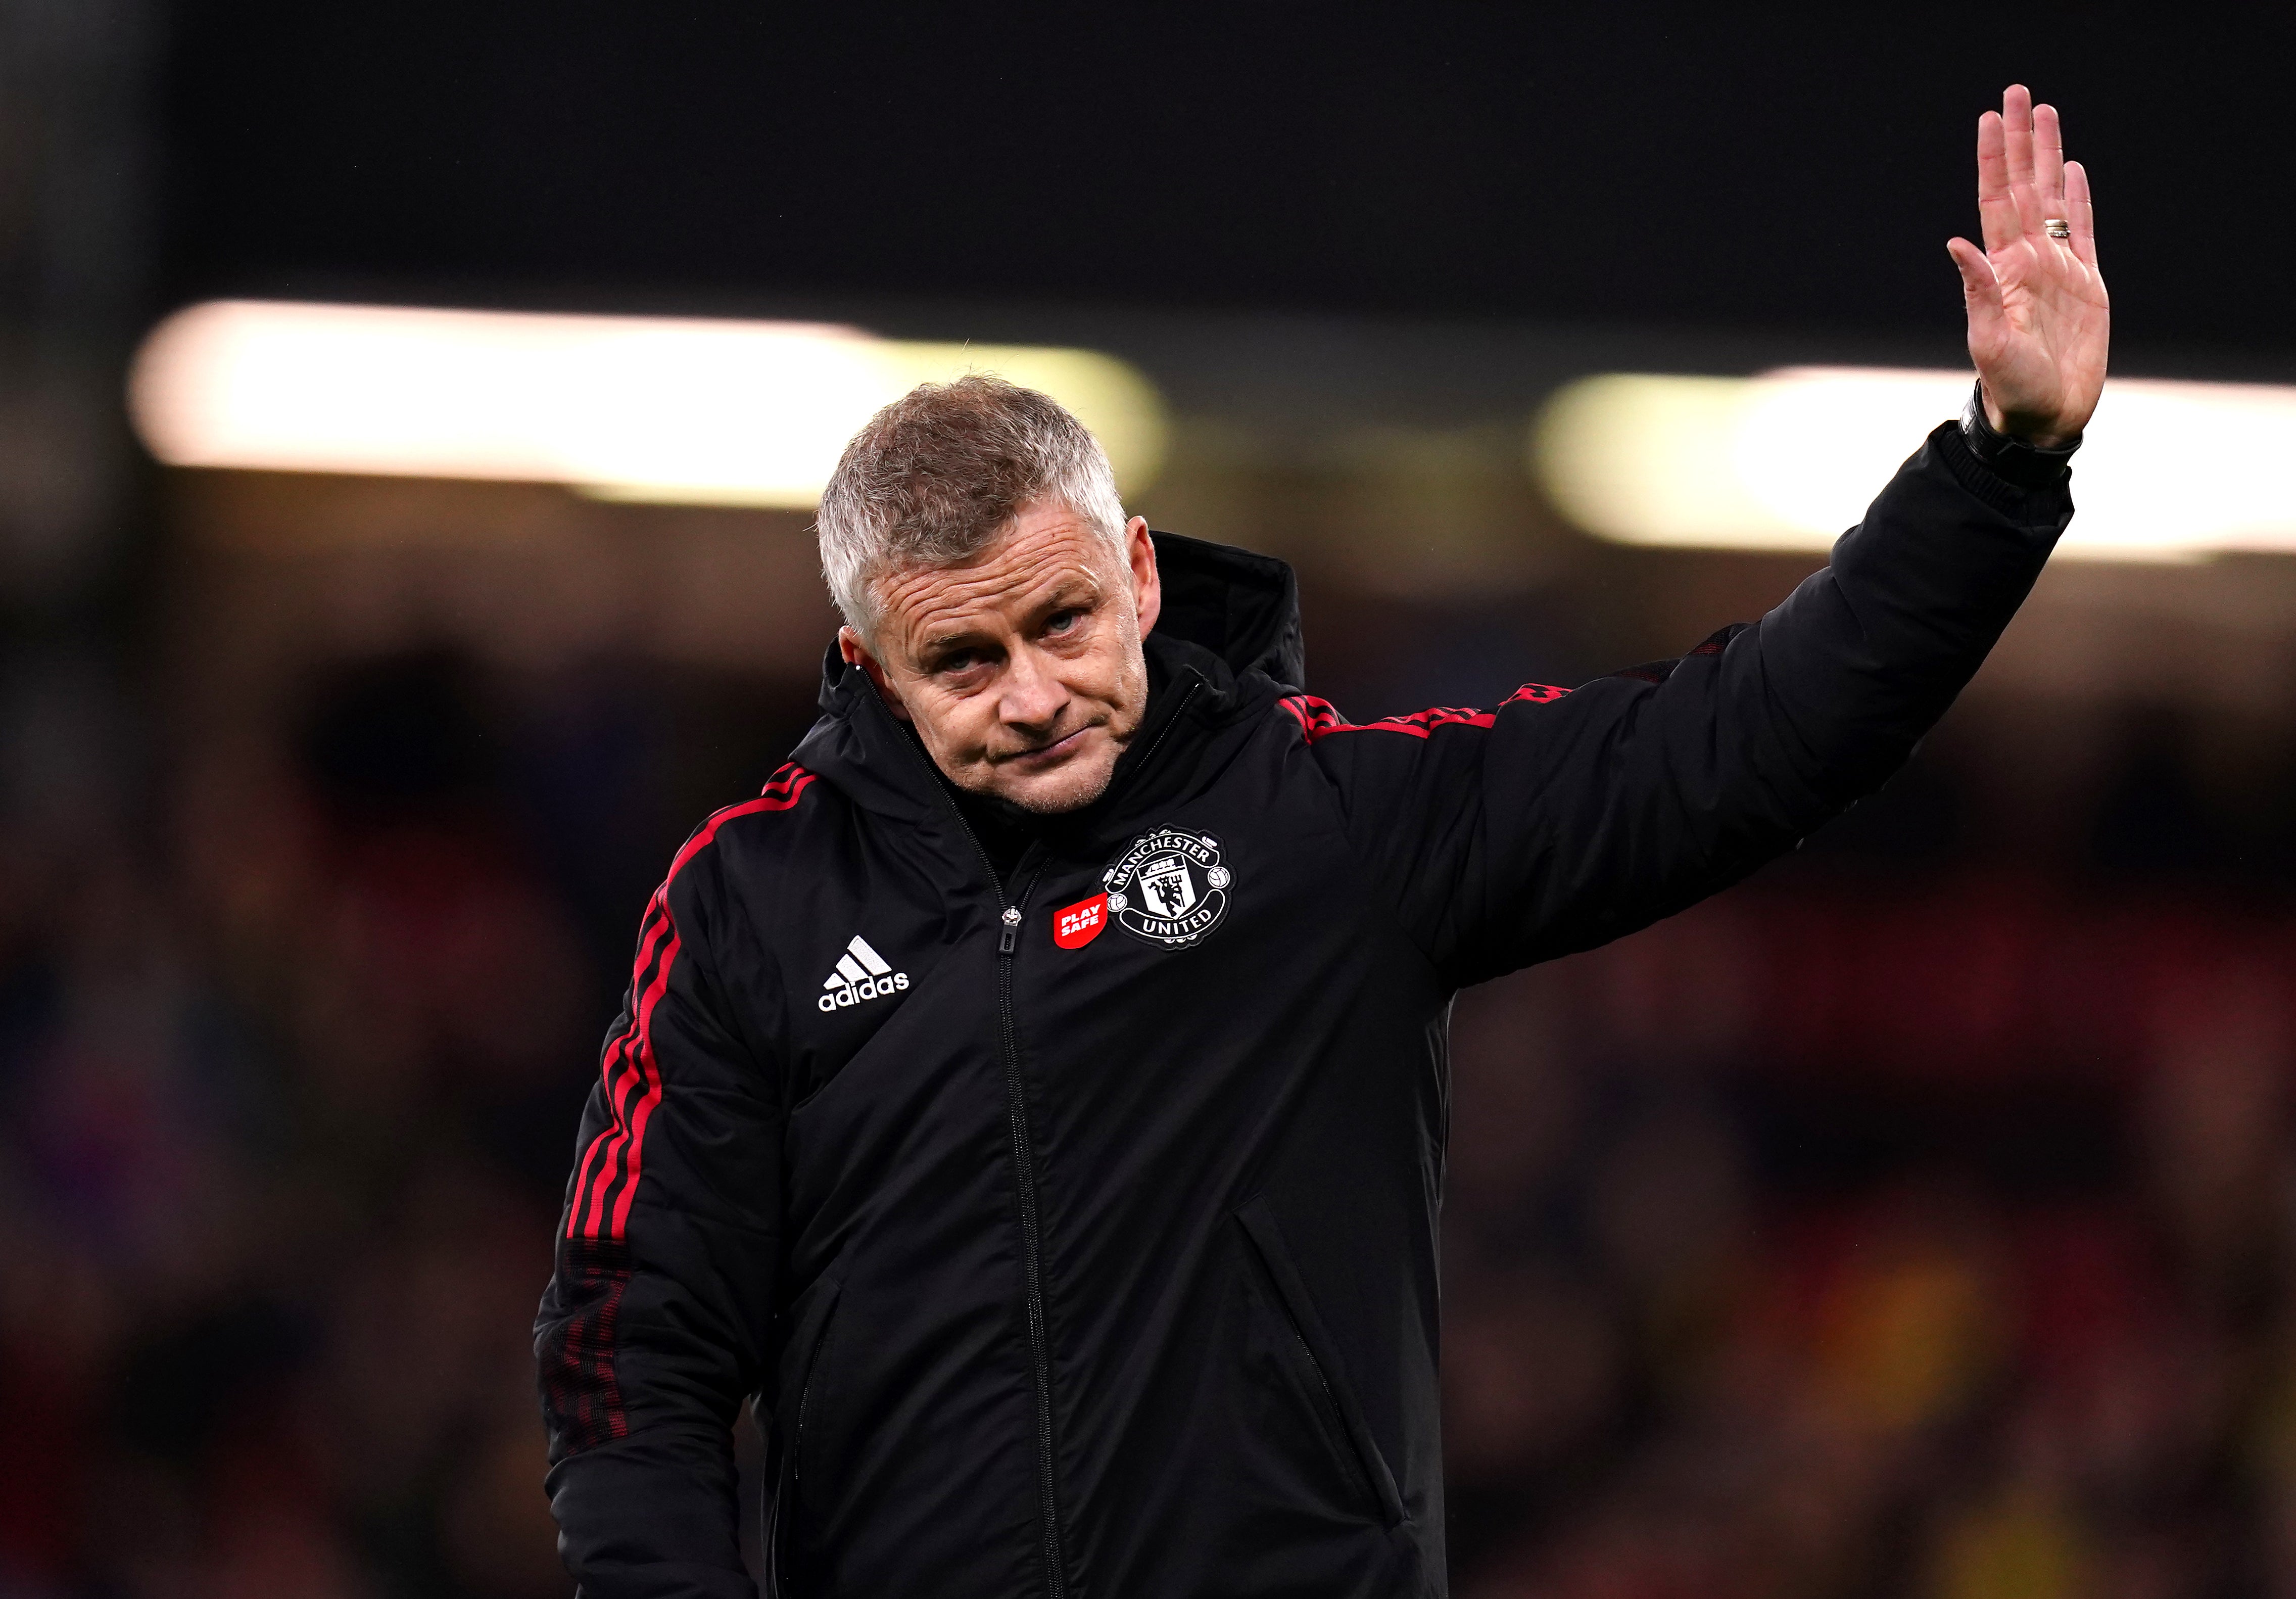 Ole Gunnar Solskjaer’s sacking in November 2021 contributed towards £24.7m spent in pay-offs by Manchester United (John Walton/PA)